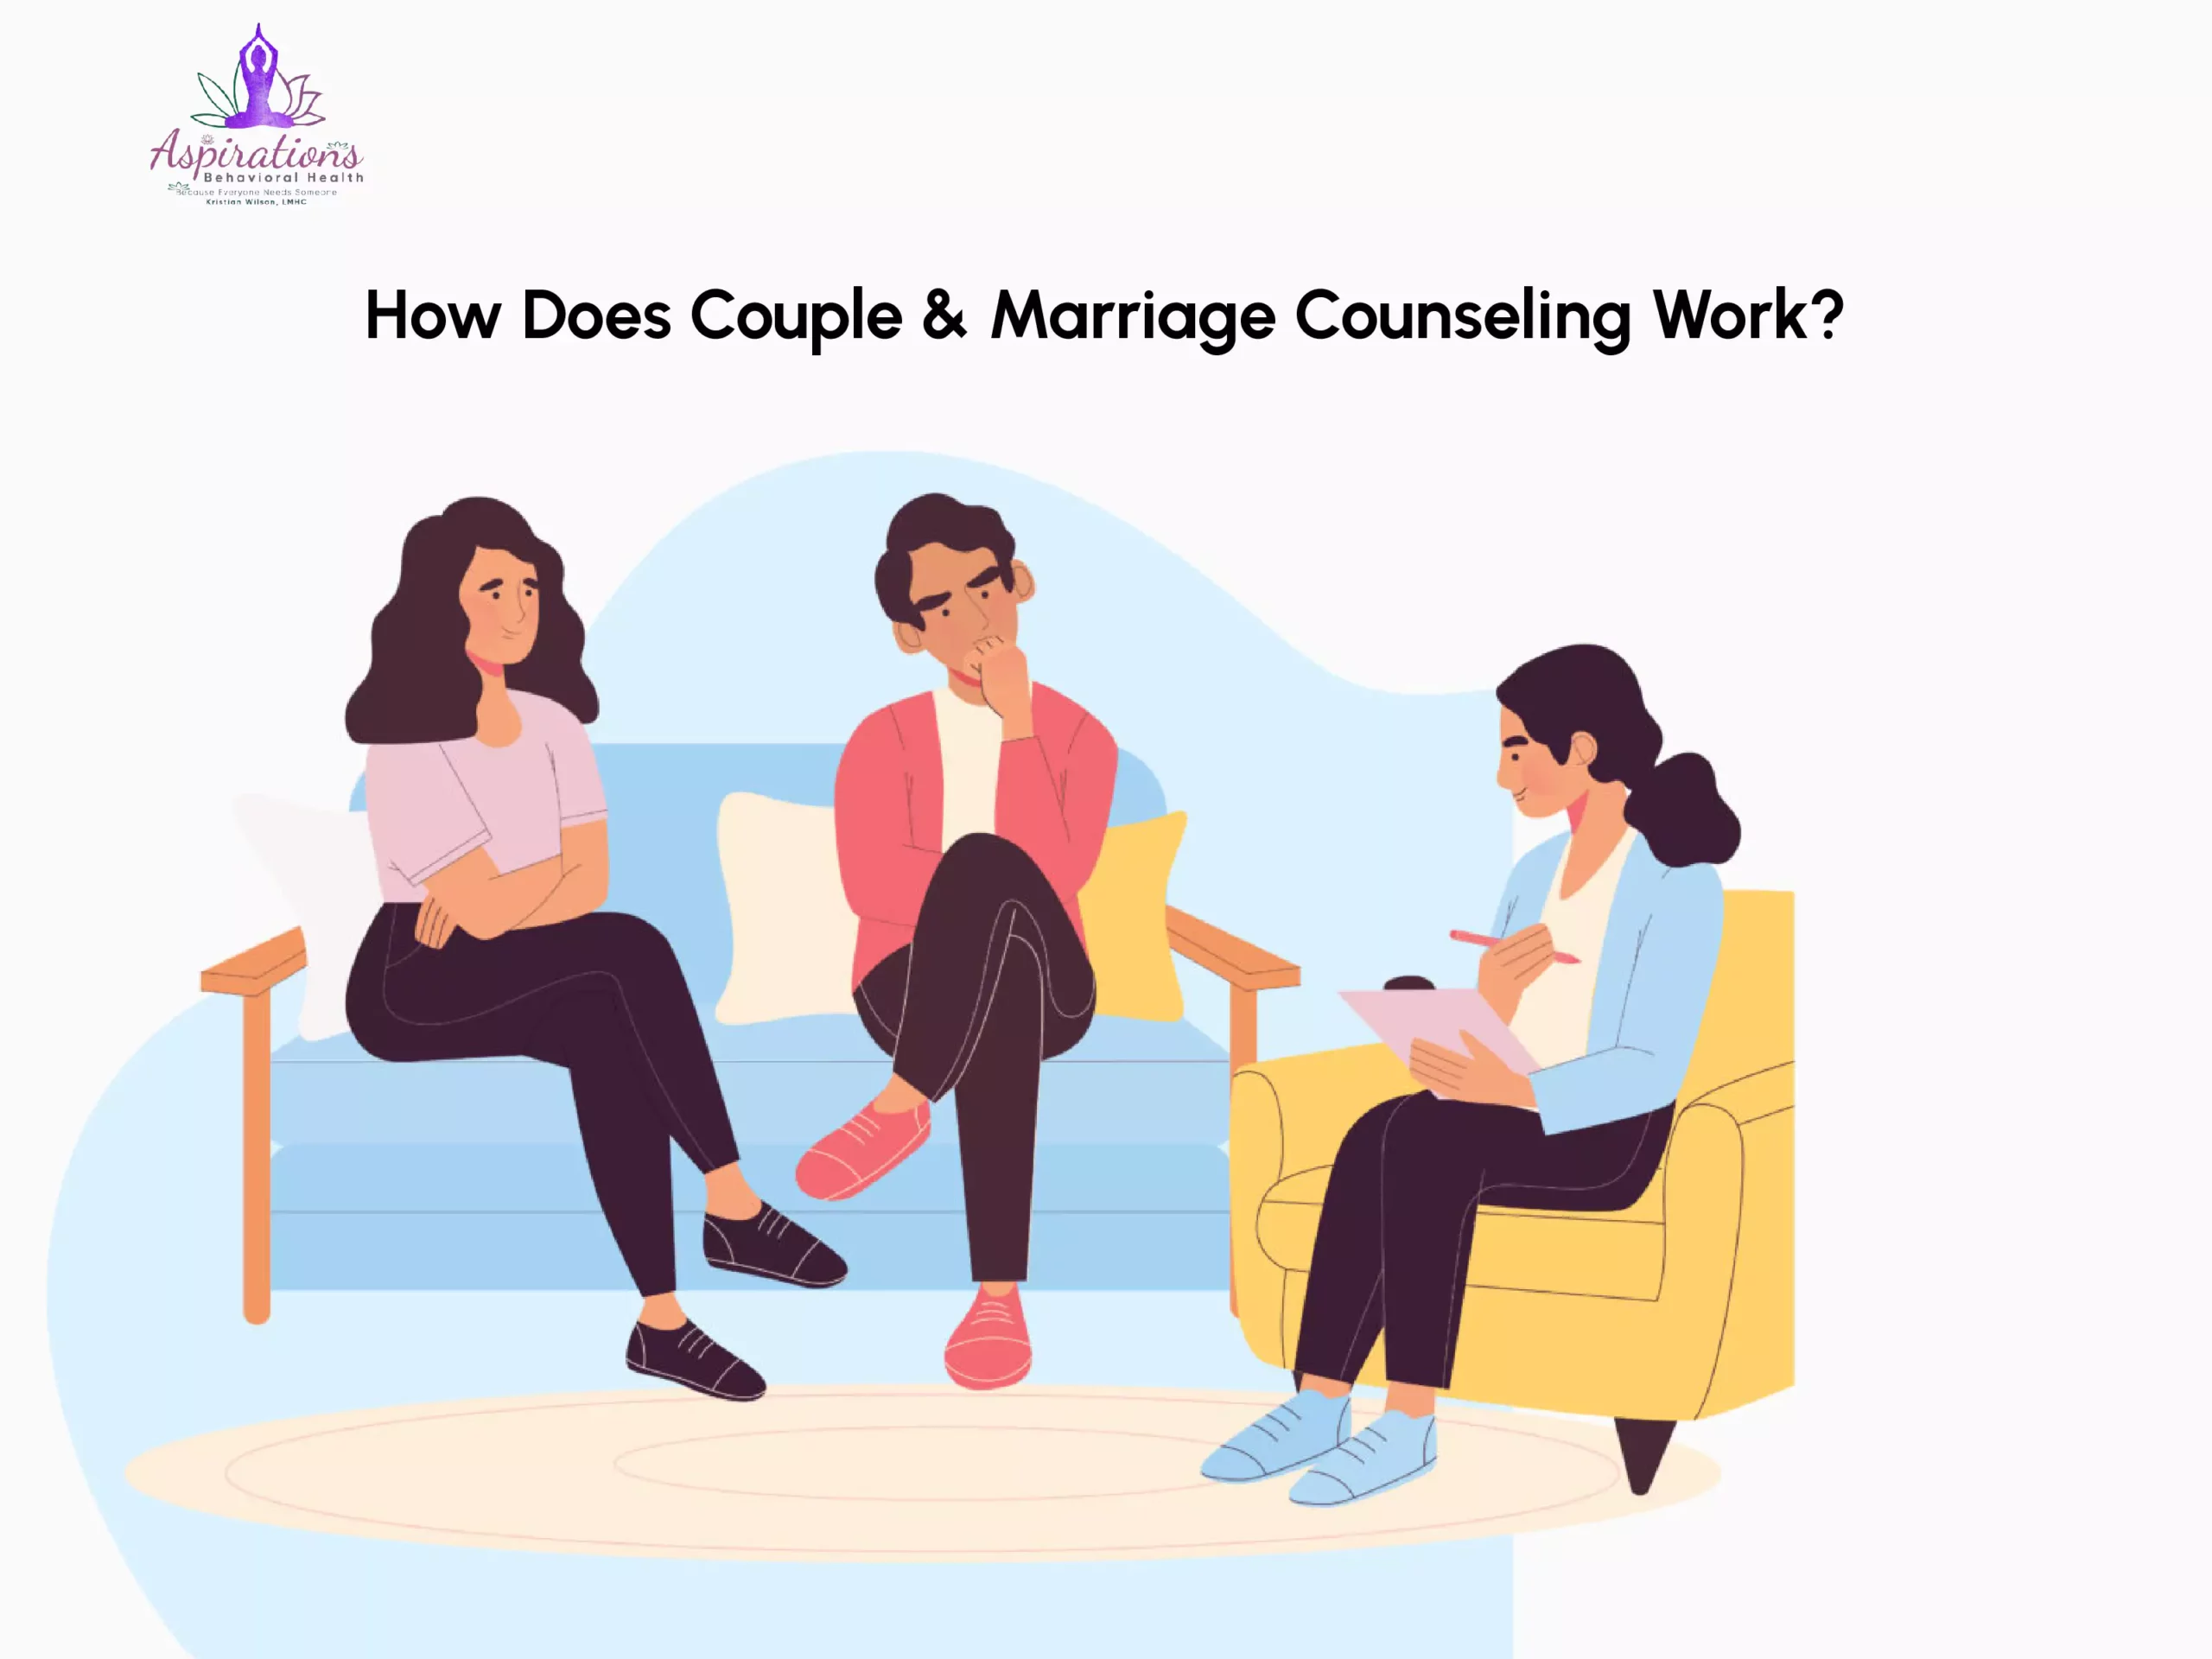 How Does Couple & Marriage Counseling Work